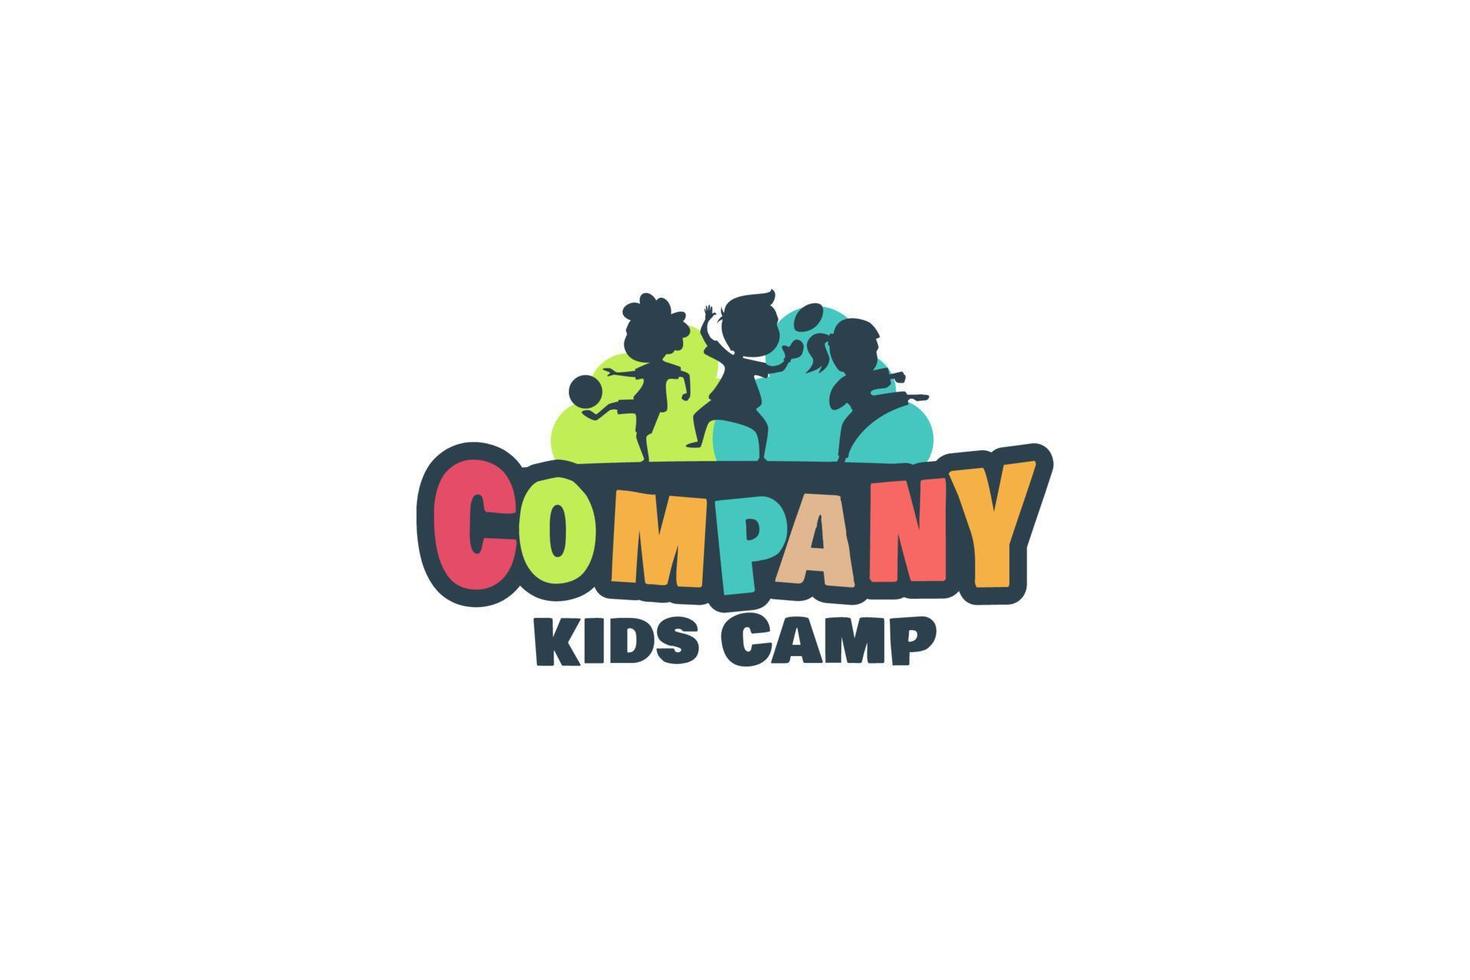 kids camp logo vector graphic for any busniness especially for playground, kids events, holiday events, kindergarten,etc.